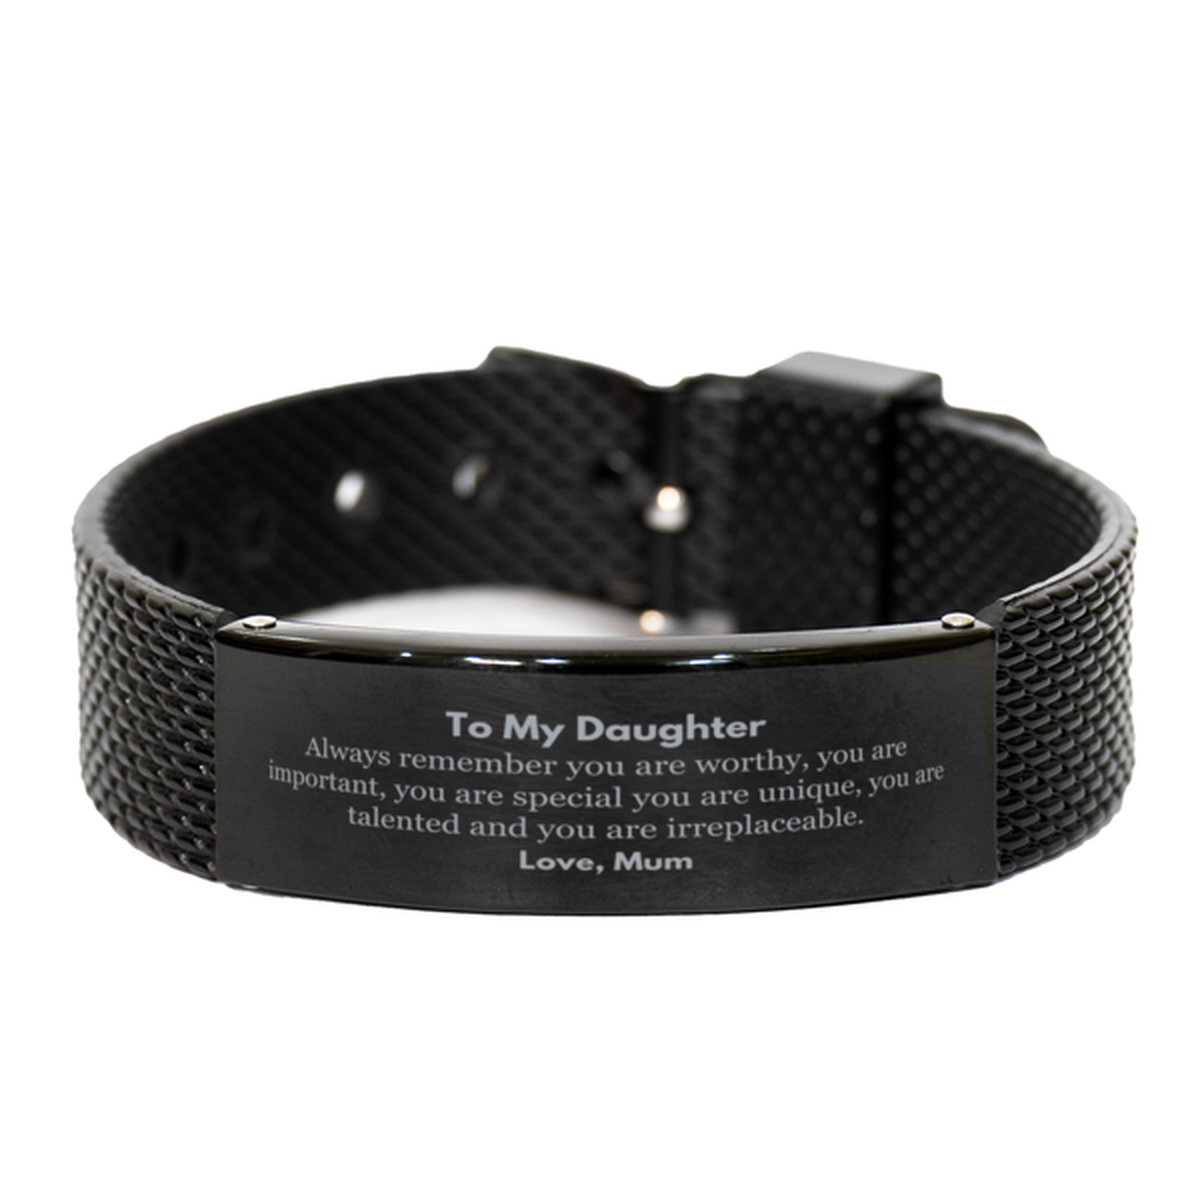 Daughter Birthday Gifts from Mum, Inspirational Black Shark Mesh Bracelet for Daughter Christmas Graduation Gifts for Daughter Always remember you are worthy, you are important. Love, Mum